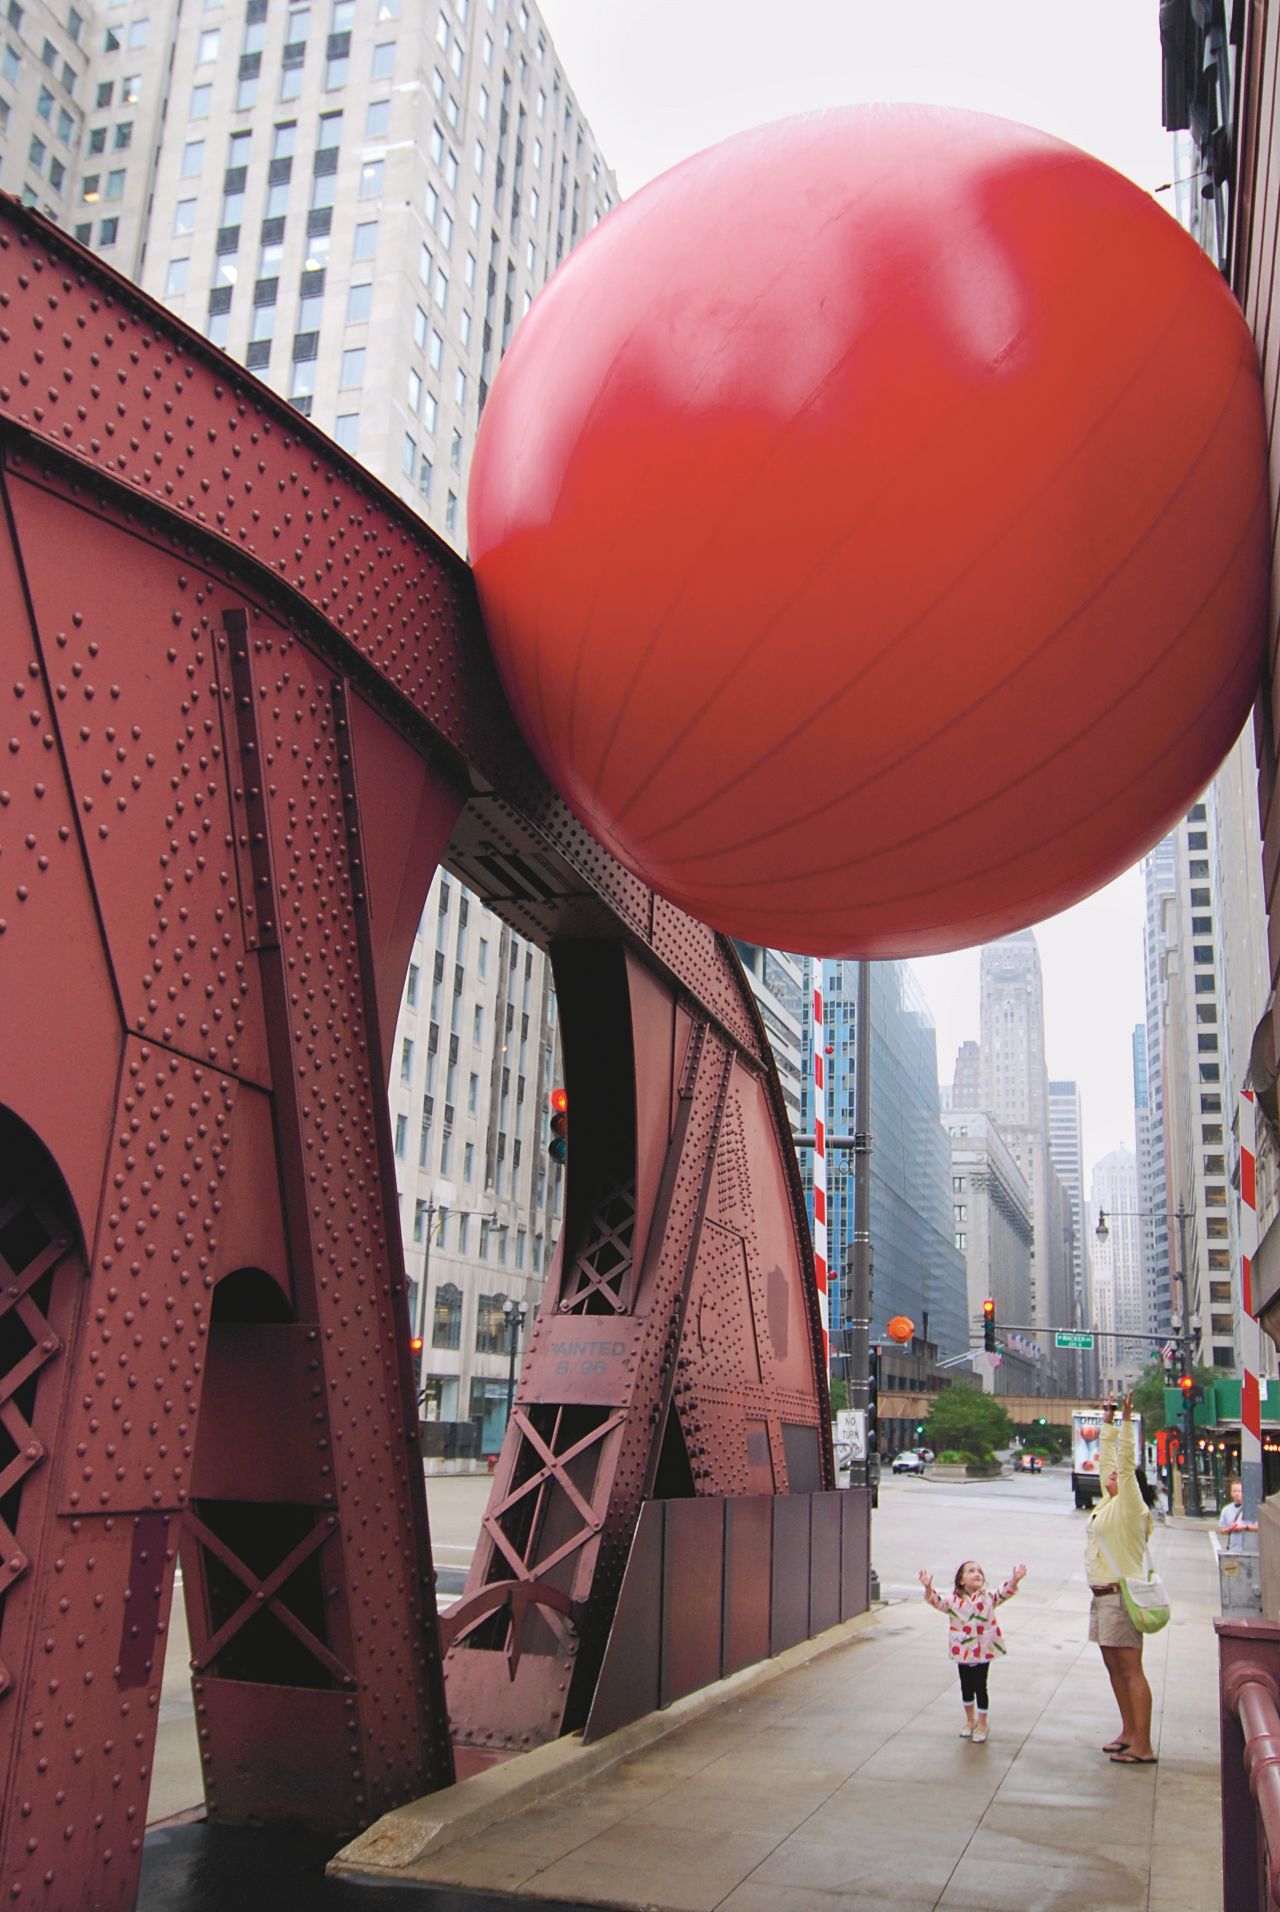 Started in 2001, the ongoing RedBall Project is a globetrotting temporary art intervention featuring a huge red vinyl sphere squeezed into unexpected spaces 